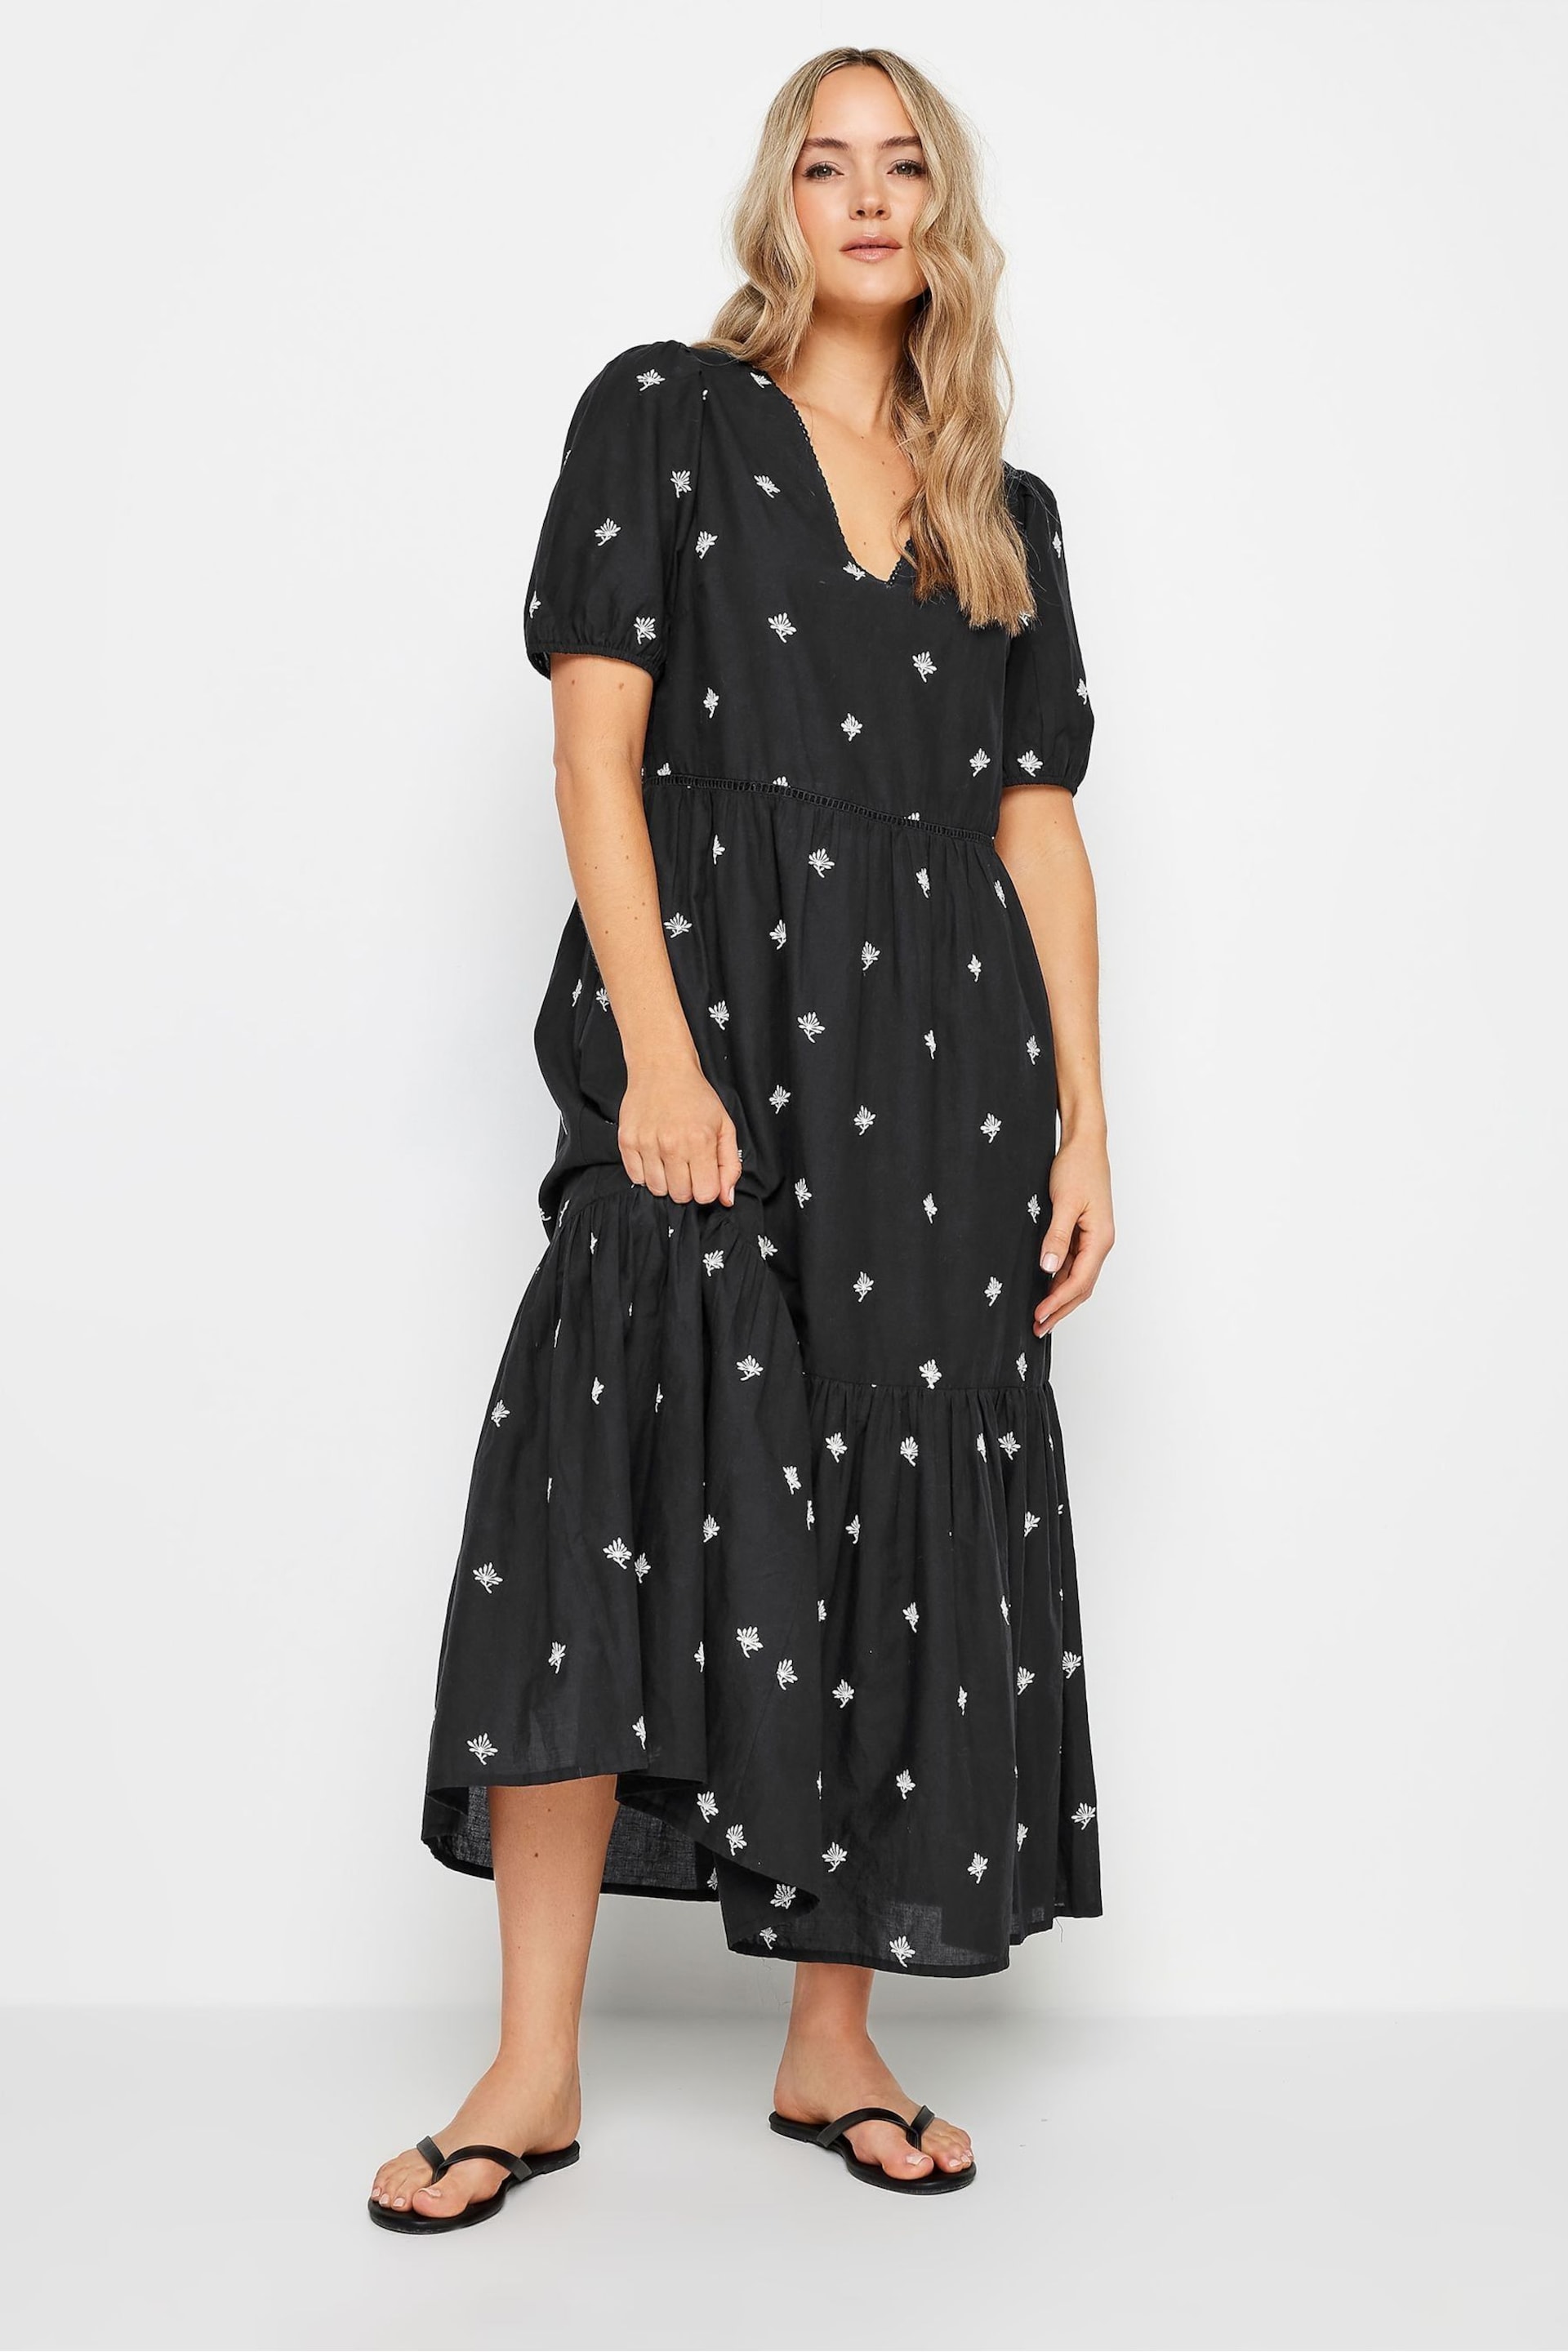 Long Tall Sally Black Embroidered V-Neck Tiered Dress - Image 3 of 6